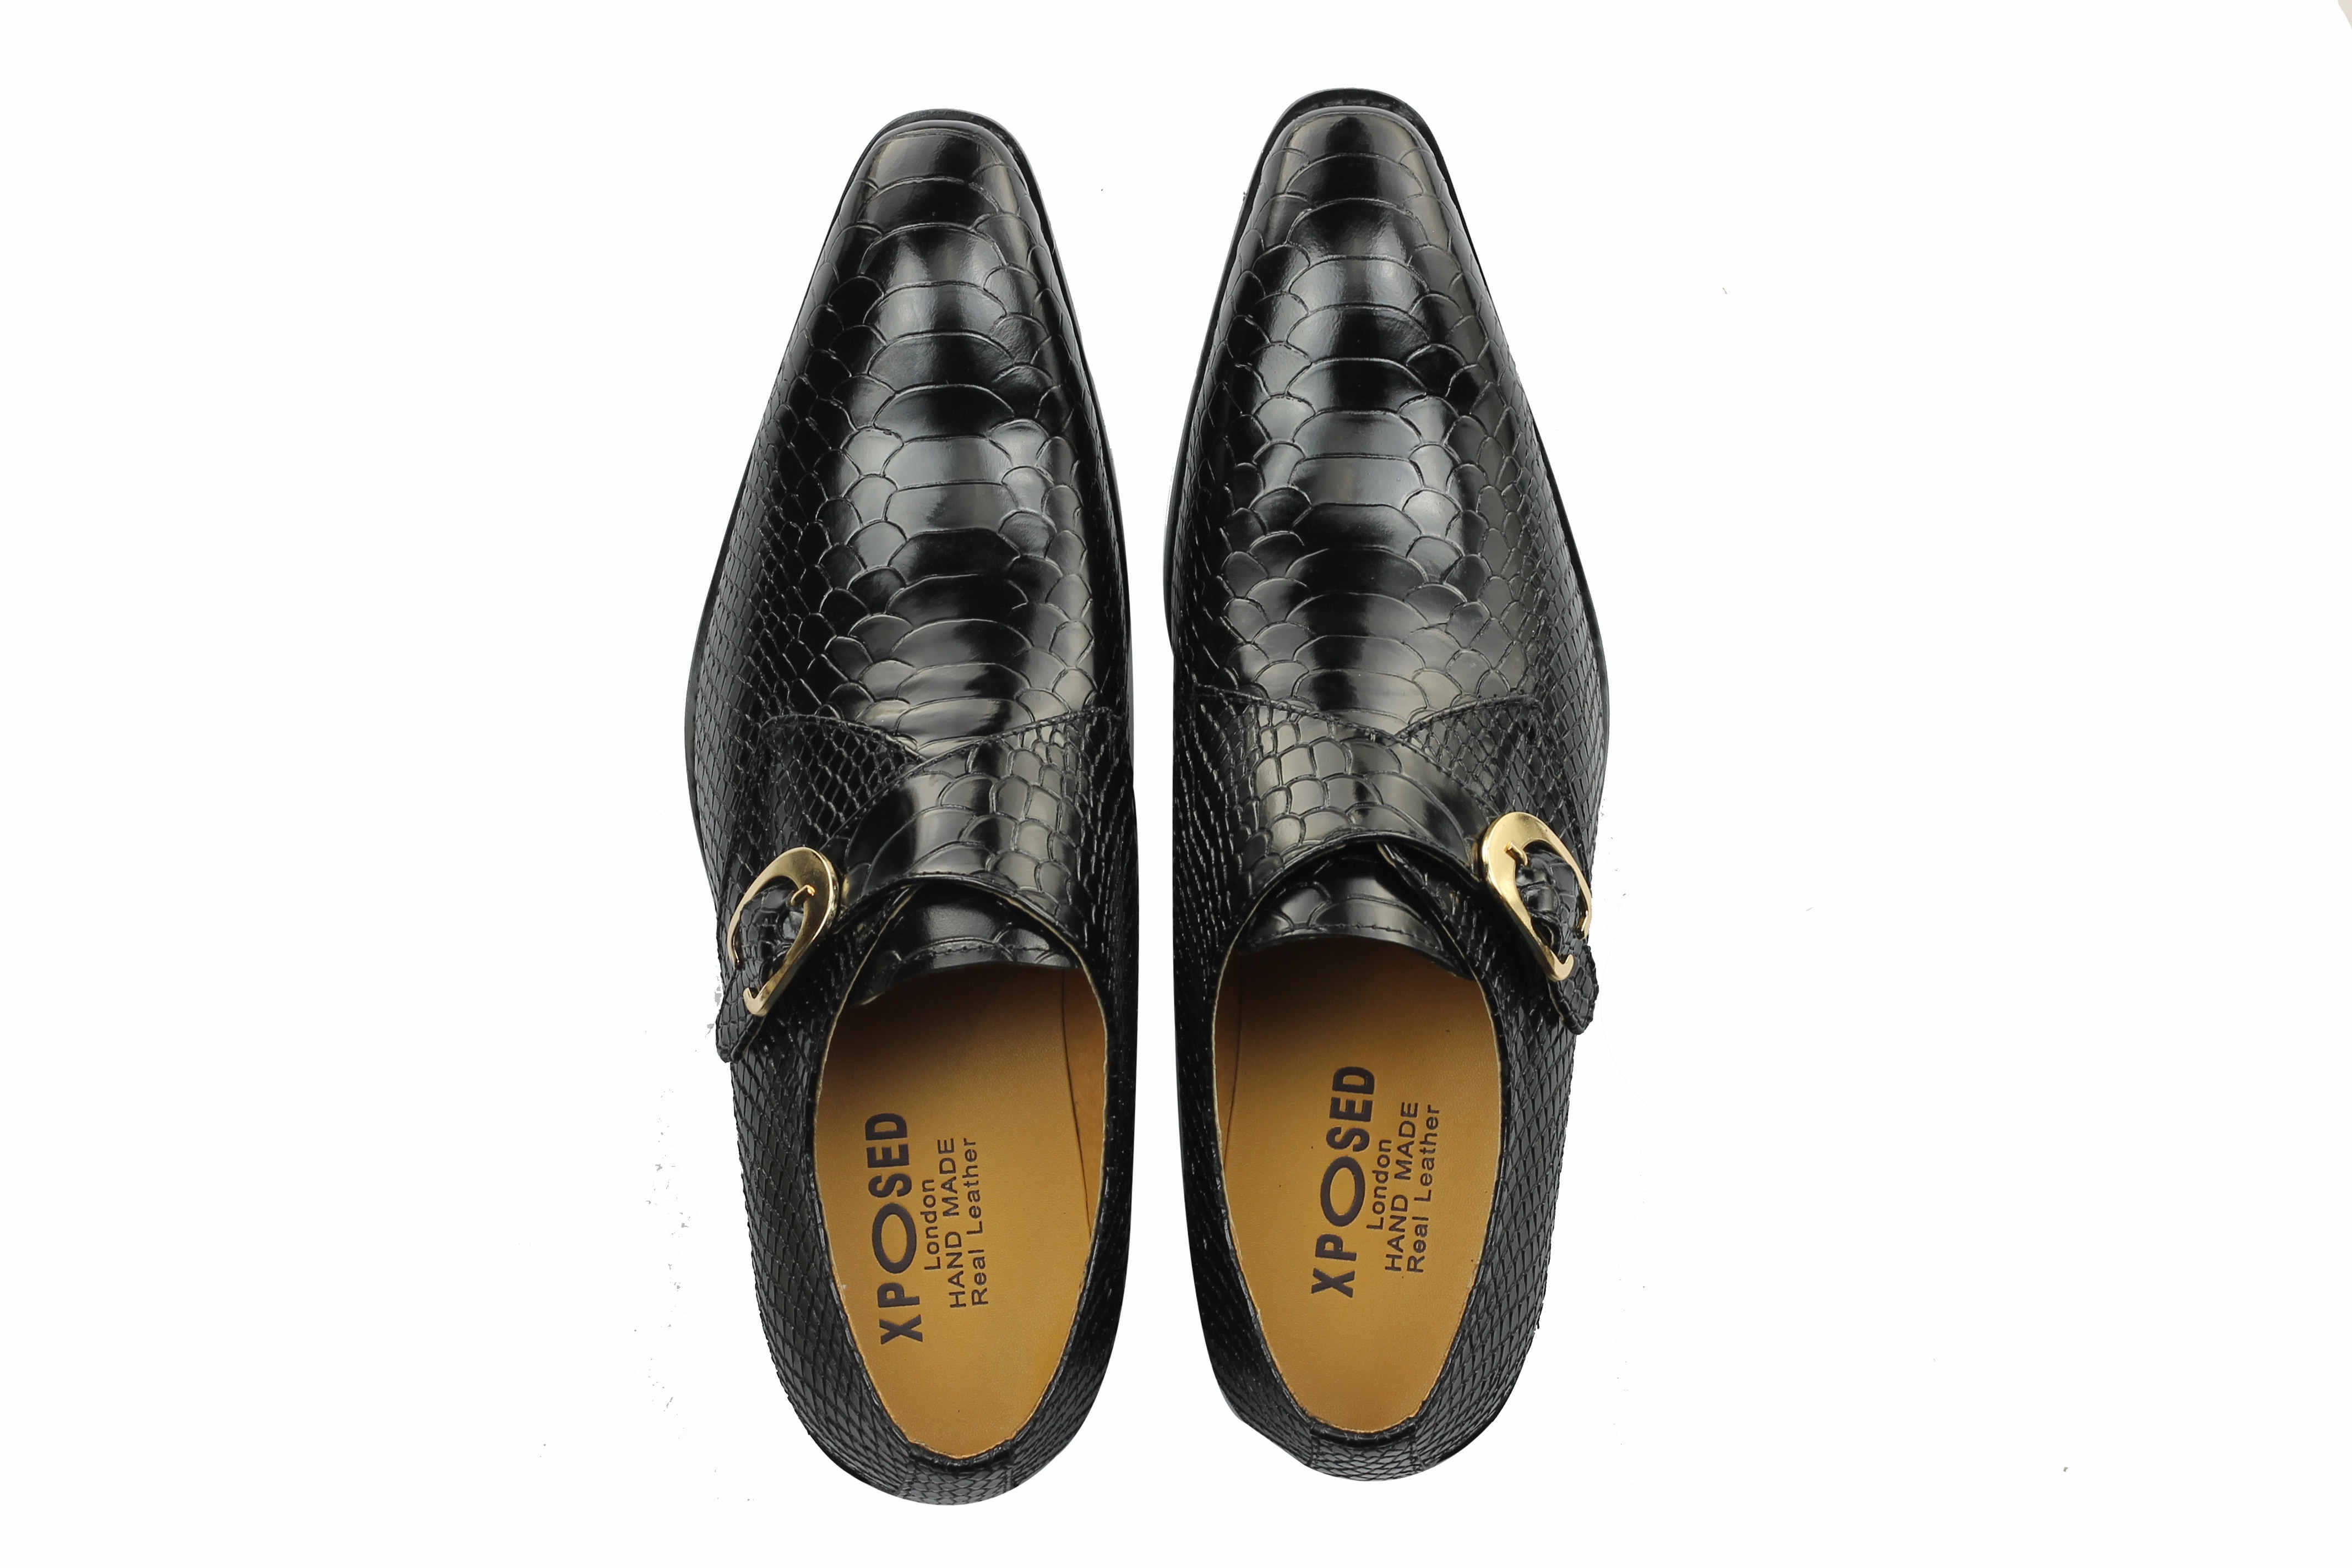 Real Leather Crocodile Effect Monk Strap Loafers